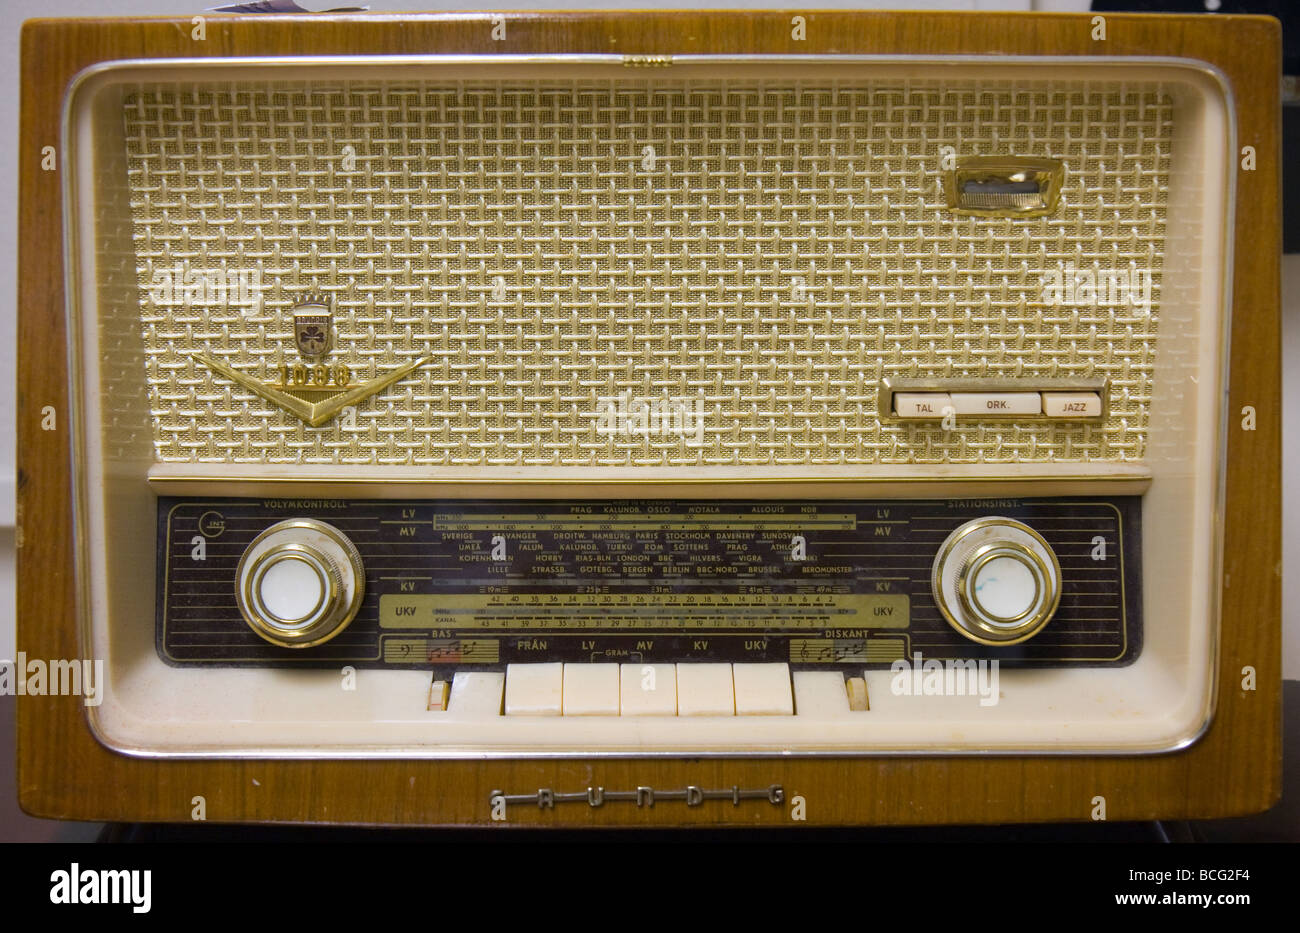 Old Grundig 1088 radio. Sort wave, middle wave, short wave and ultra short wave bands. Showing city names in Swedish. Stock Photo